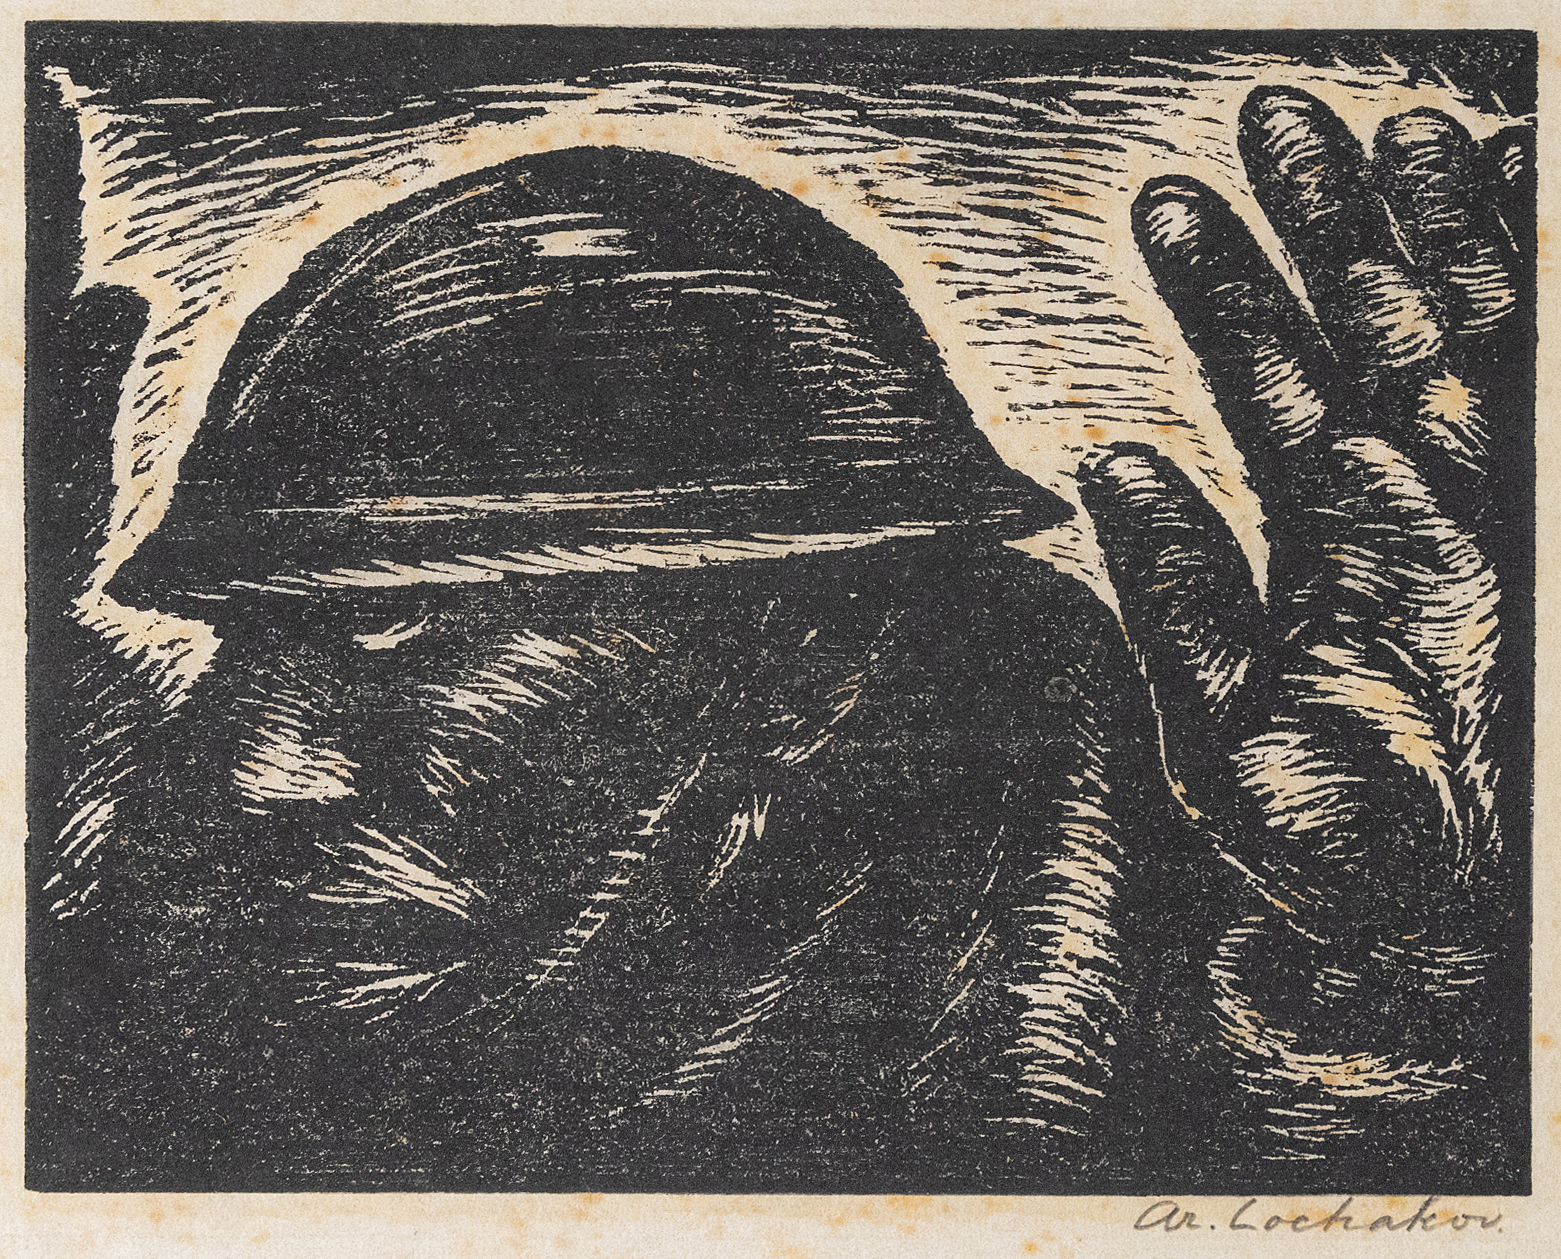 A black-and-white print showing a close-up of a hand with fingers spread against a dark backdrop.